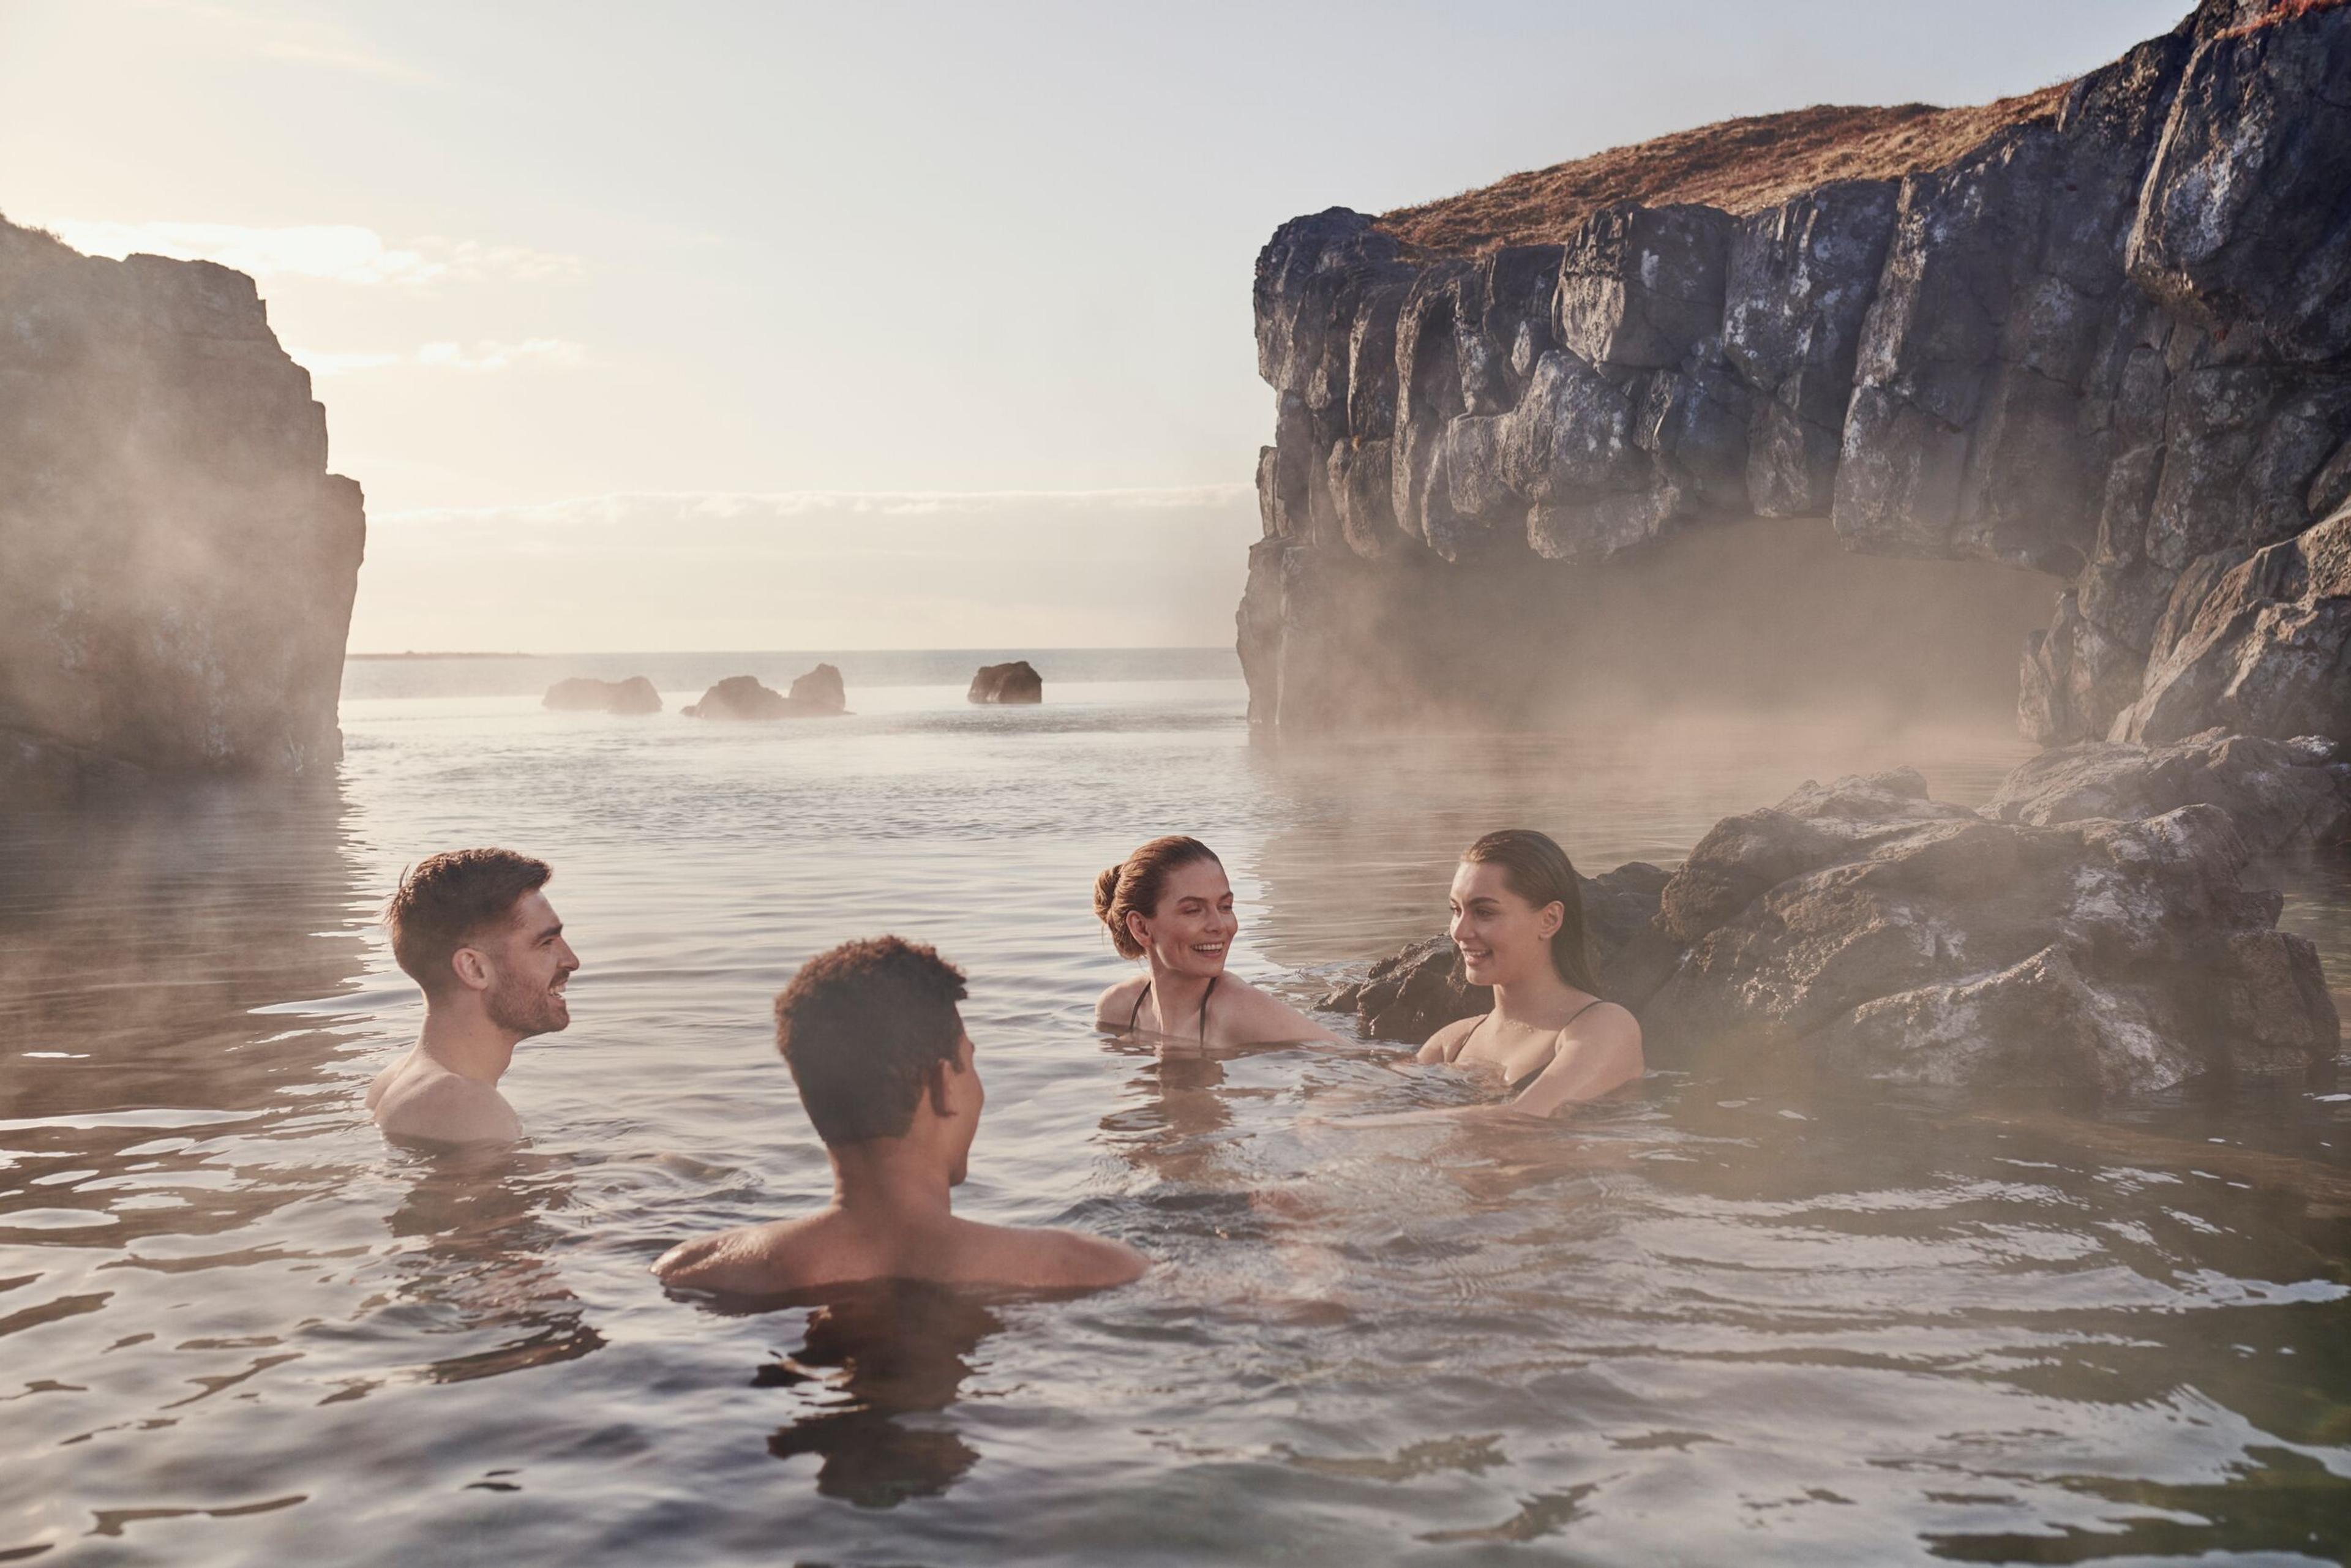 People soaking in the warm infinity pool at Sky Lagoon, Iceland.